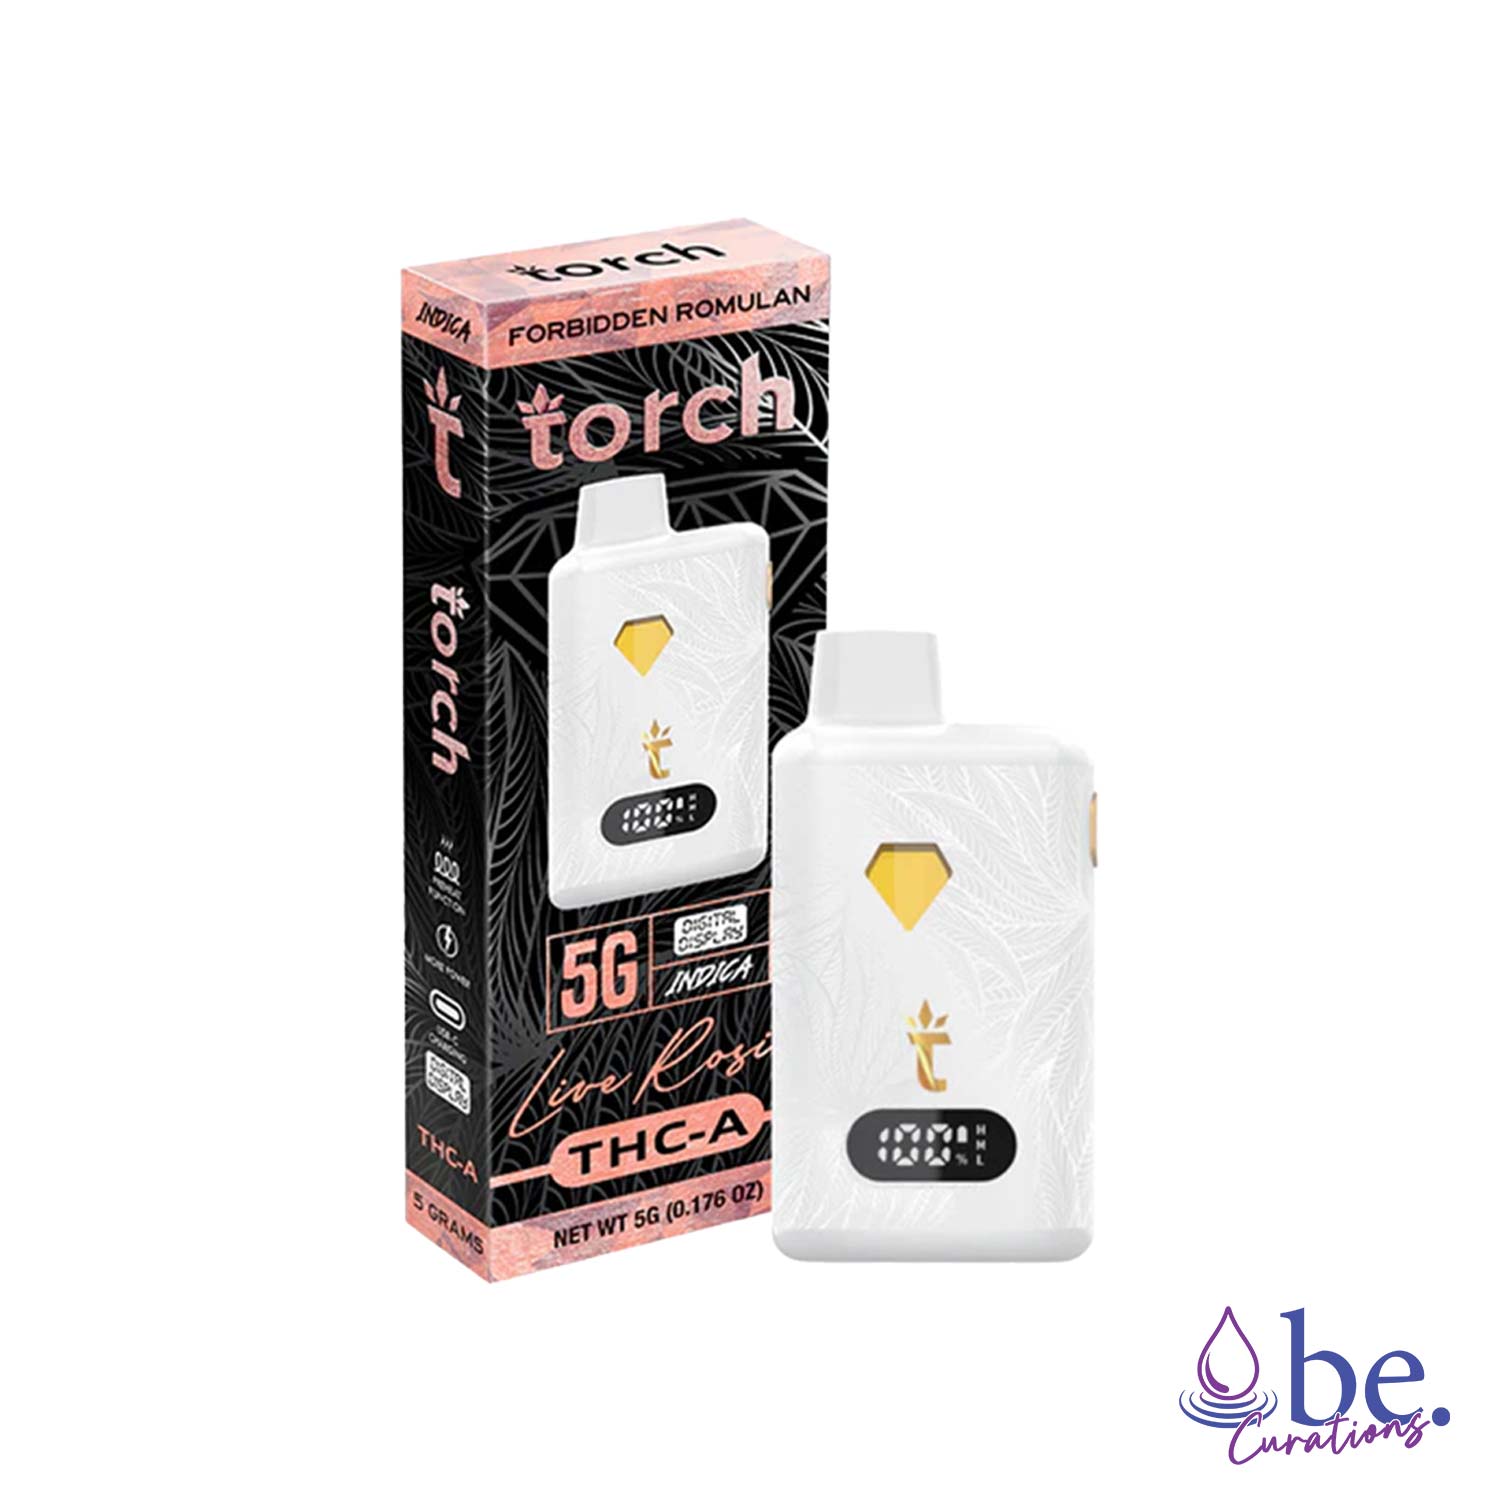 Torch Delta THC-A + Live Rosin Disposable Vape Device 5G - Forbidden Romulan (Indica) | Piney undertones intertwined with bold tropical flavors. | be.Curations